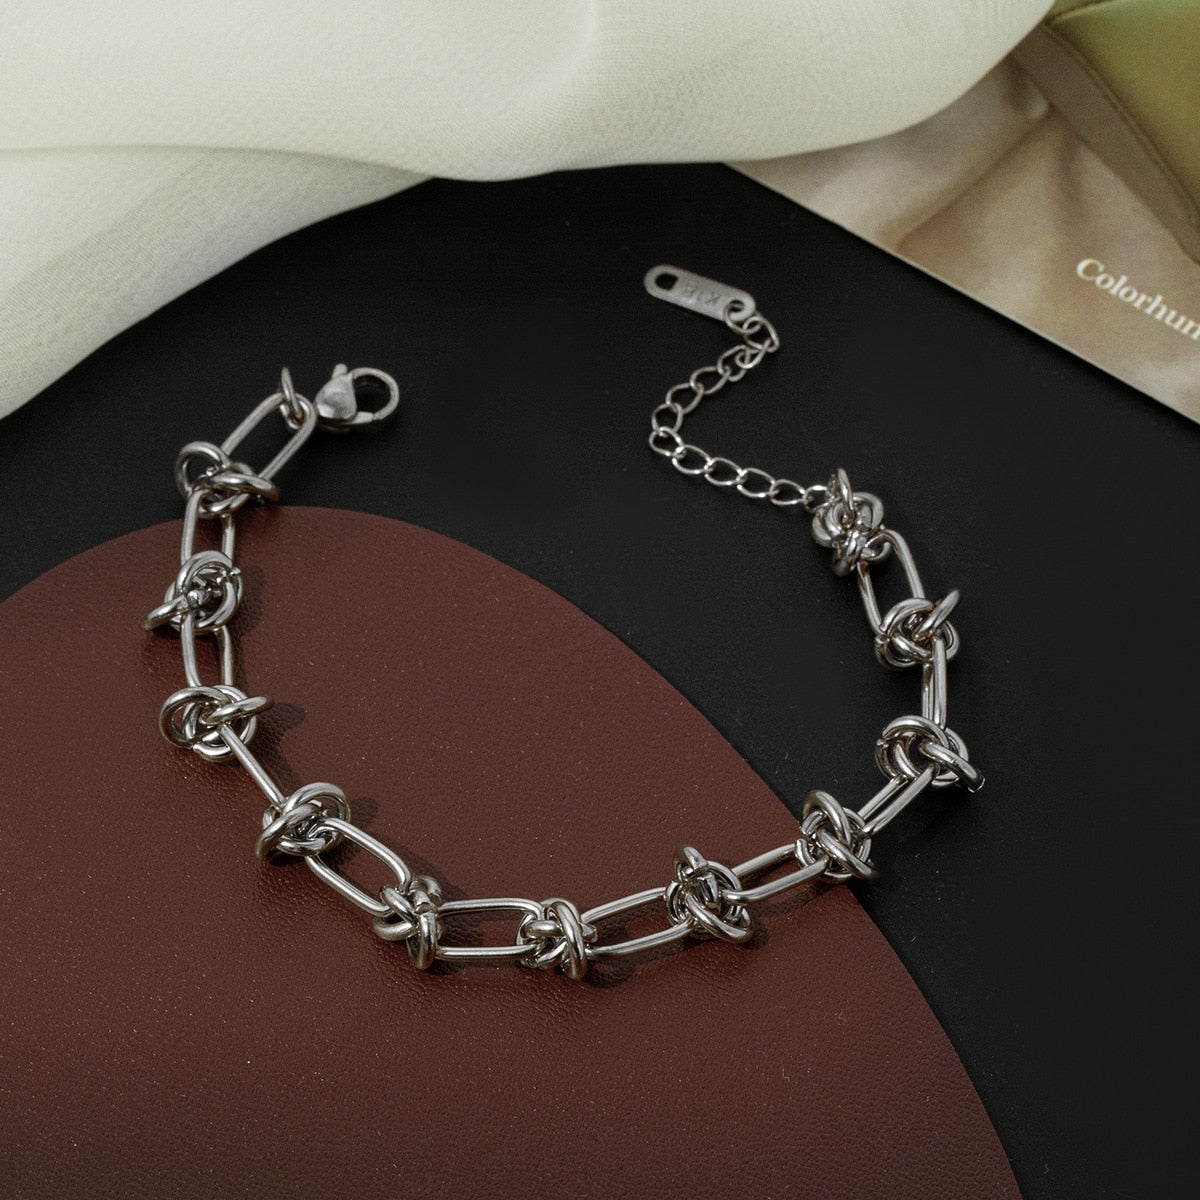 Plated Knot Chain Bracelet